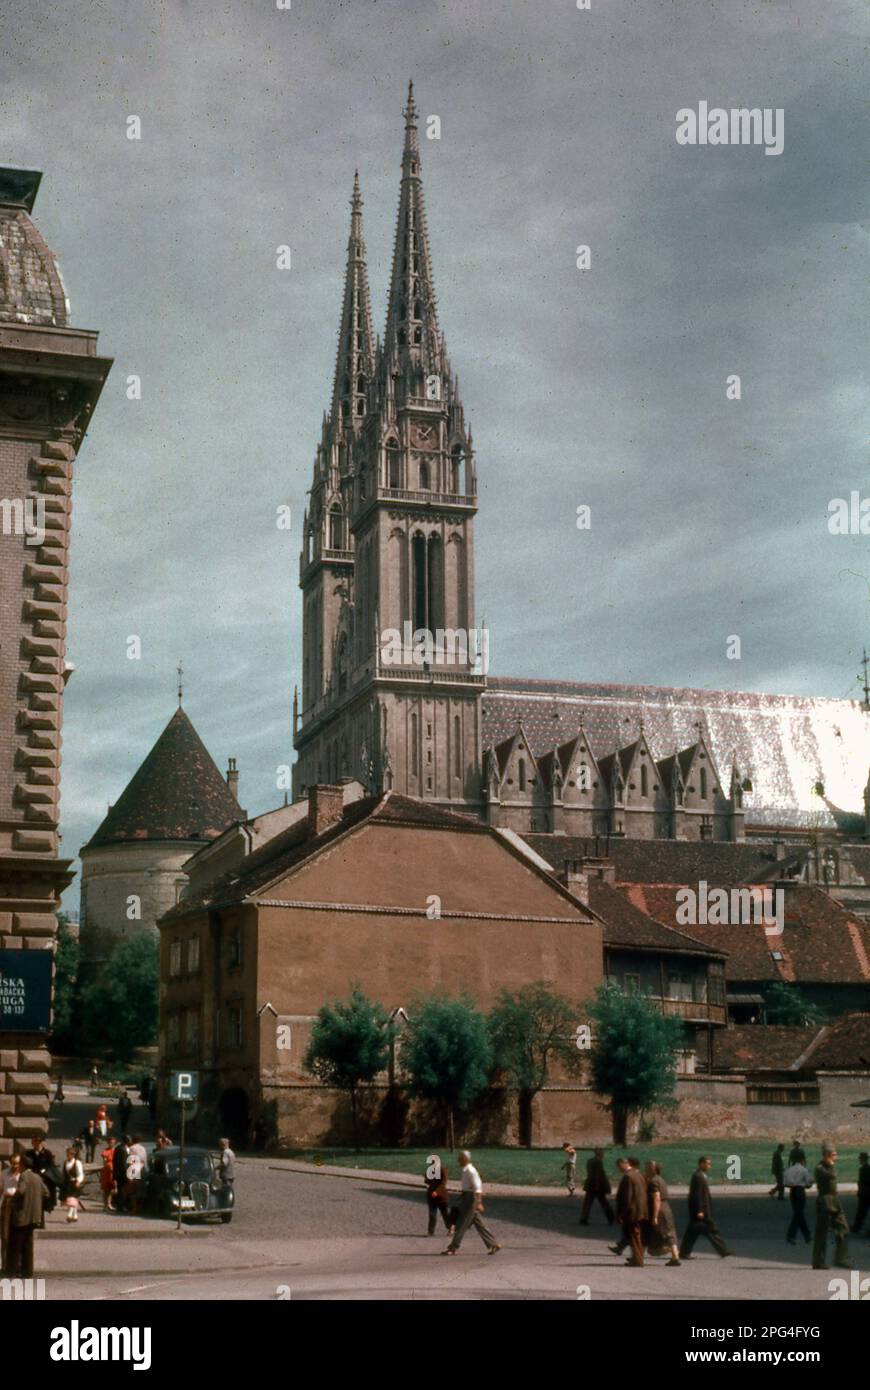 1960s, historical, exterior view from this era of Zagreb Cathedral, Kaptol, Croatia, a Roman Catholic cathedral-church built in the mid-13th century, with later reconstructions/additions. The second tallest building in Croatia, its spires are landmarks of the city. Stock Photo